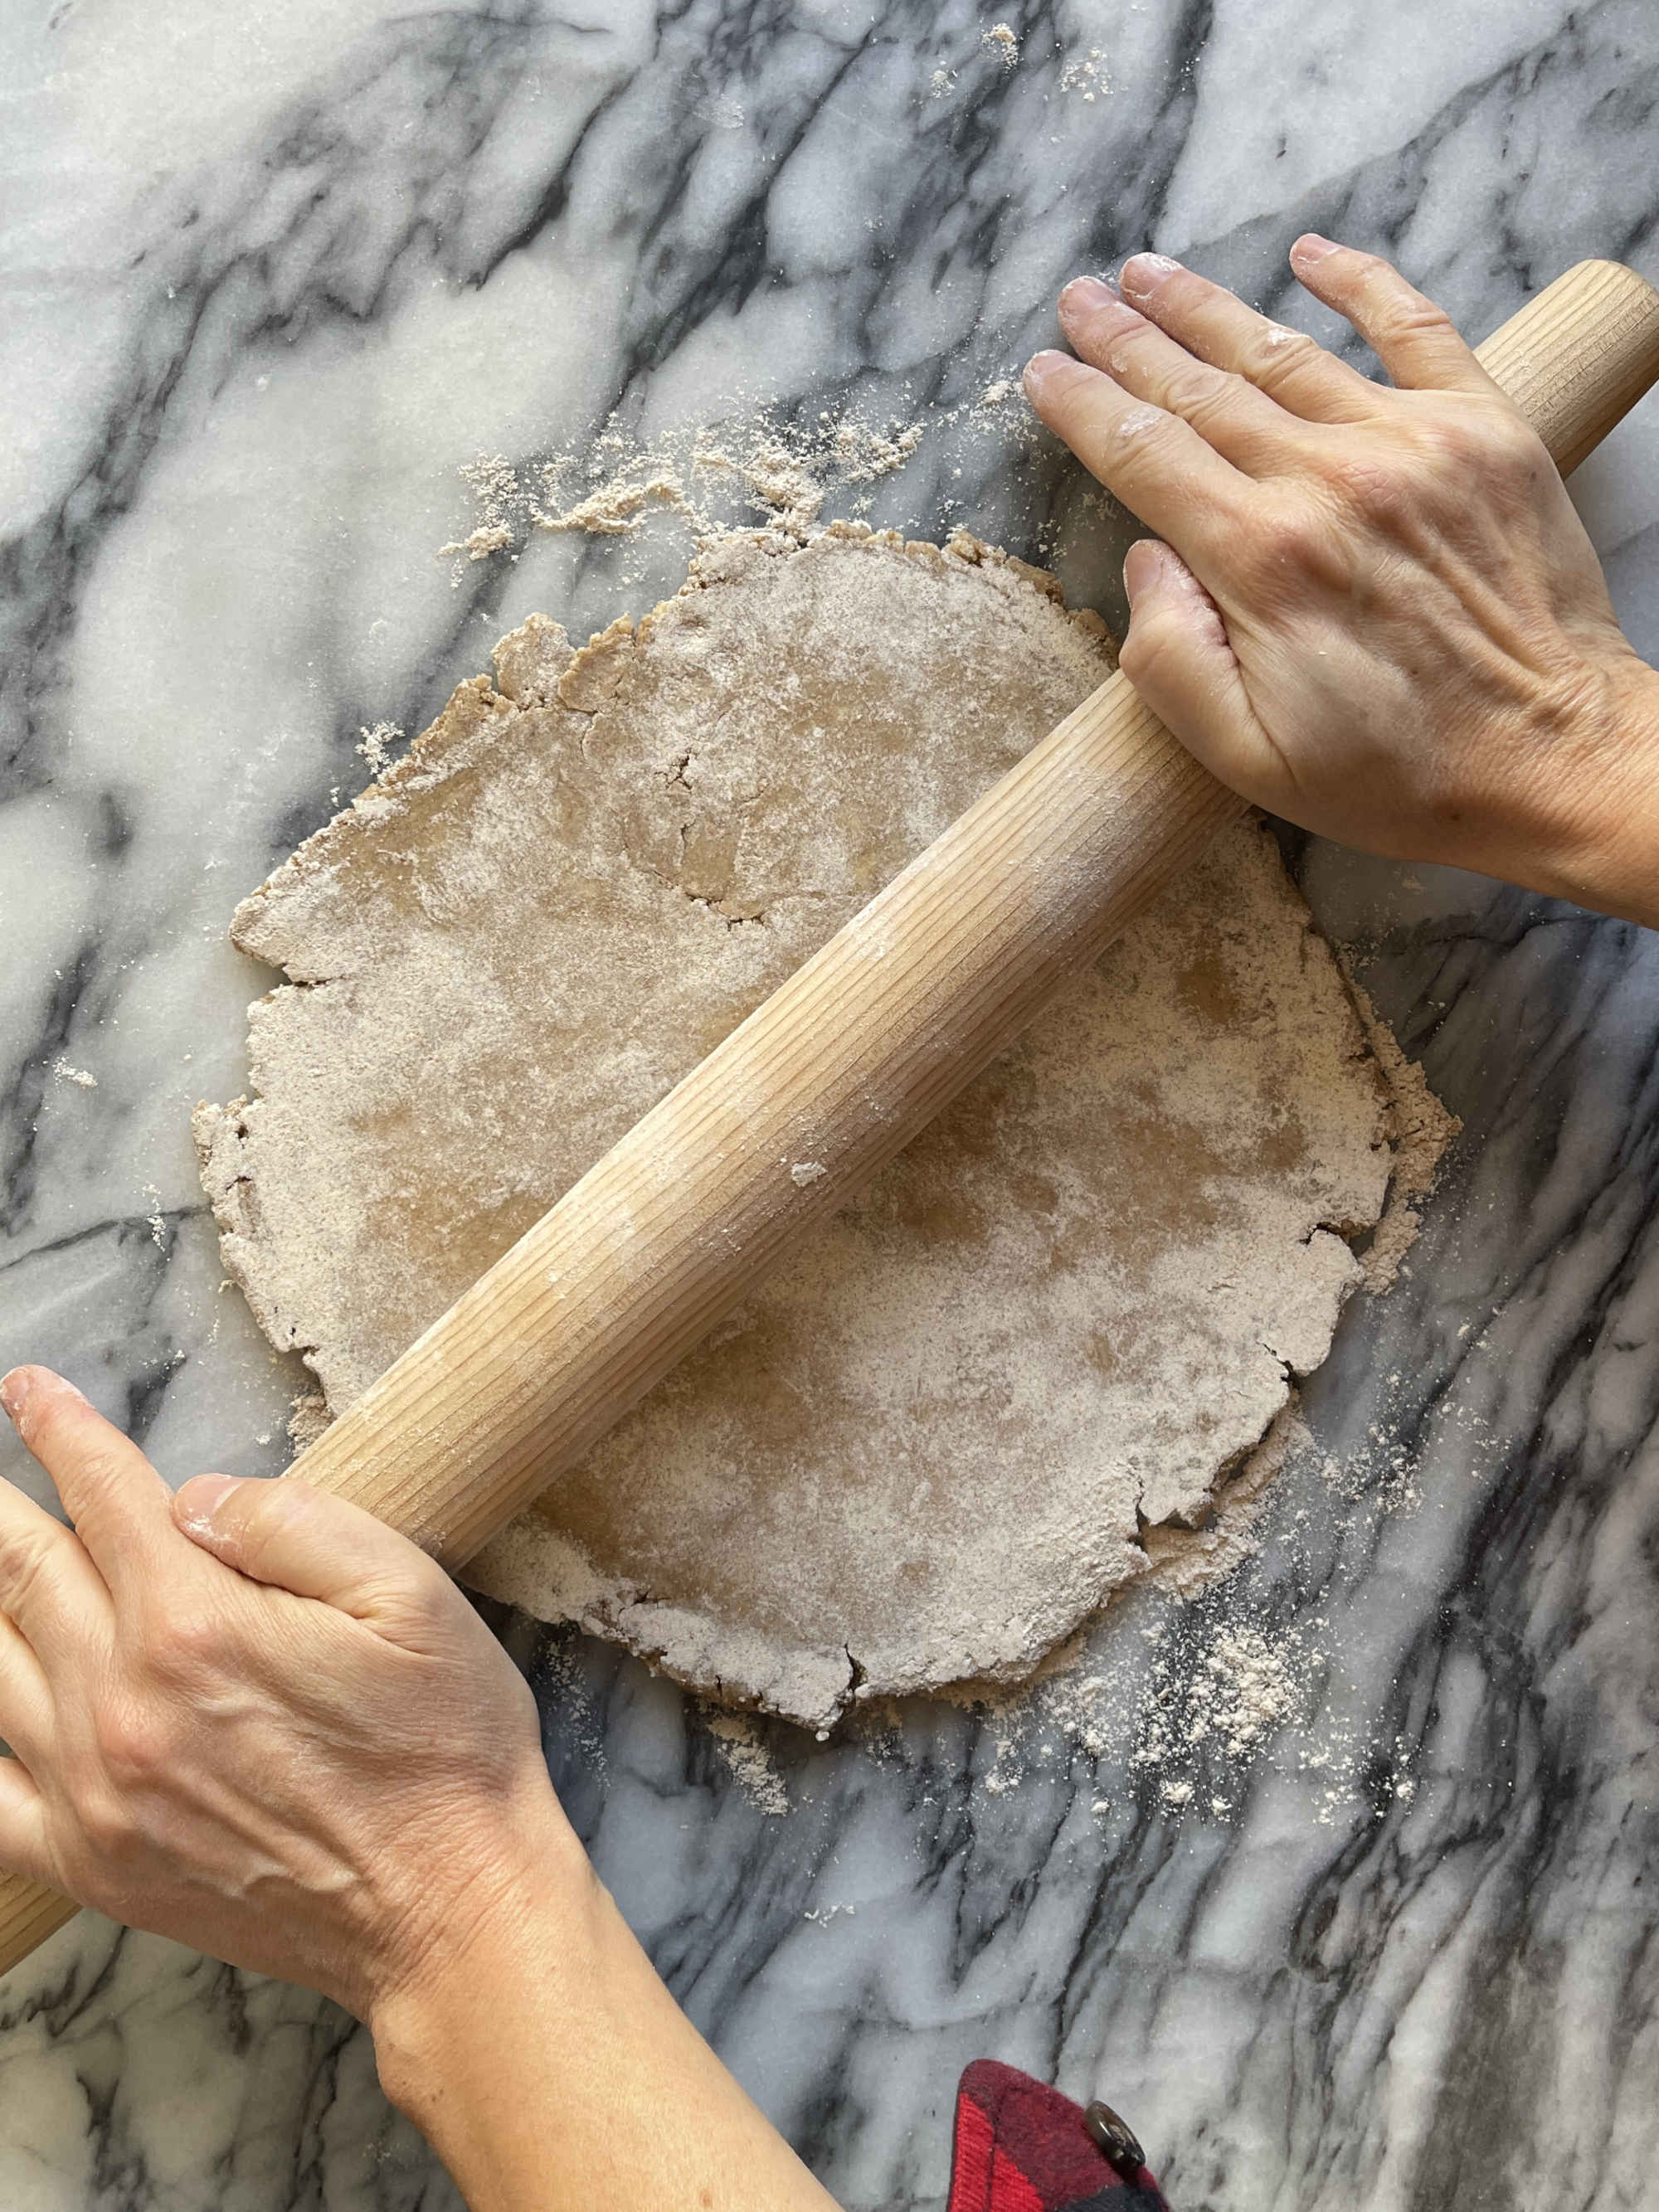 Hands roll out whole wheat pastry with a tapered rolling pin on grey and white marble